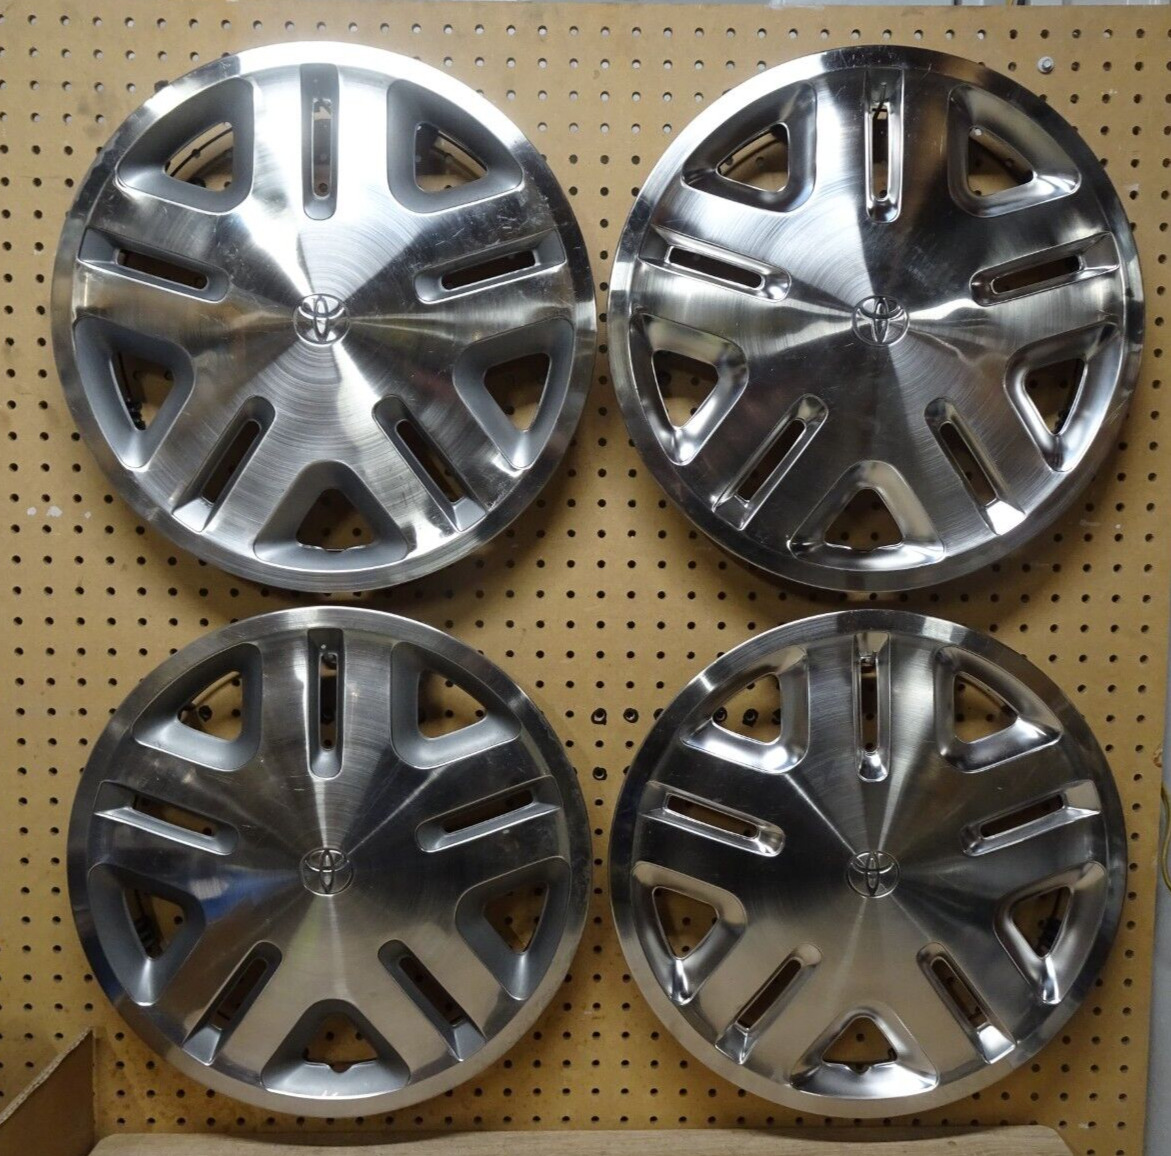 (4) Set of 1993-1998 Toyota T100 Tacoma 15” Hubcaps Wheel Covers 462134011 61078